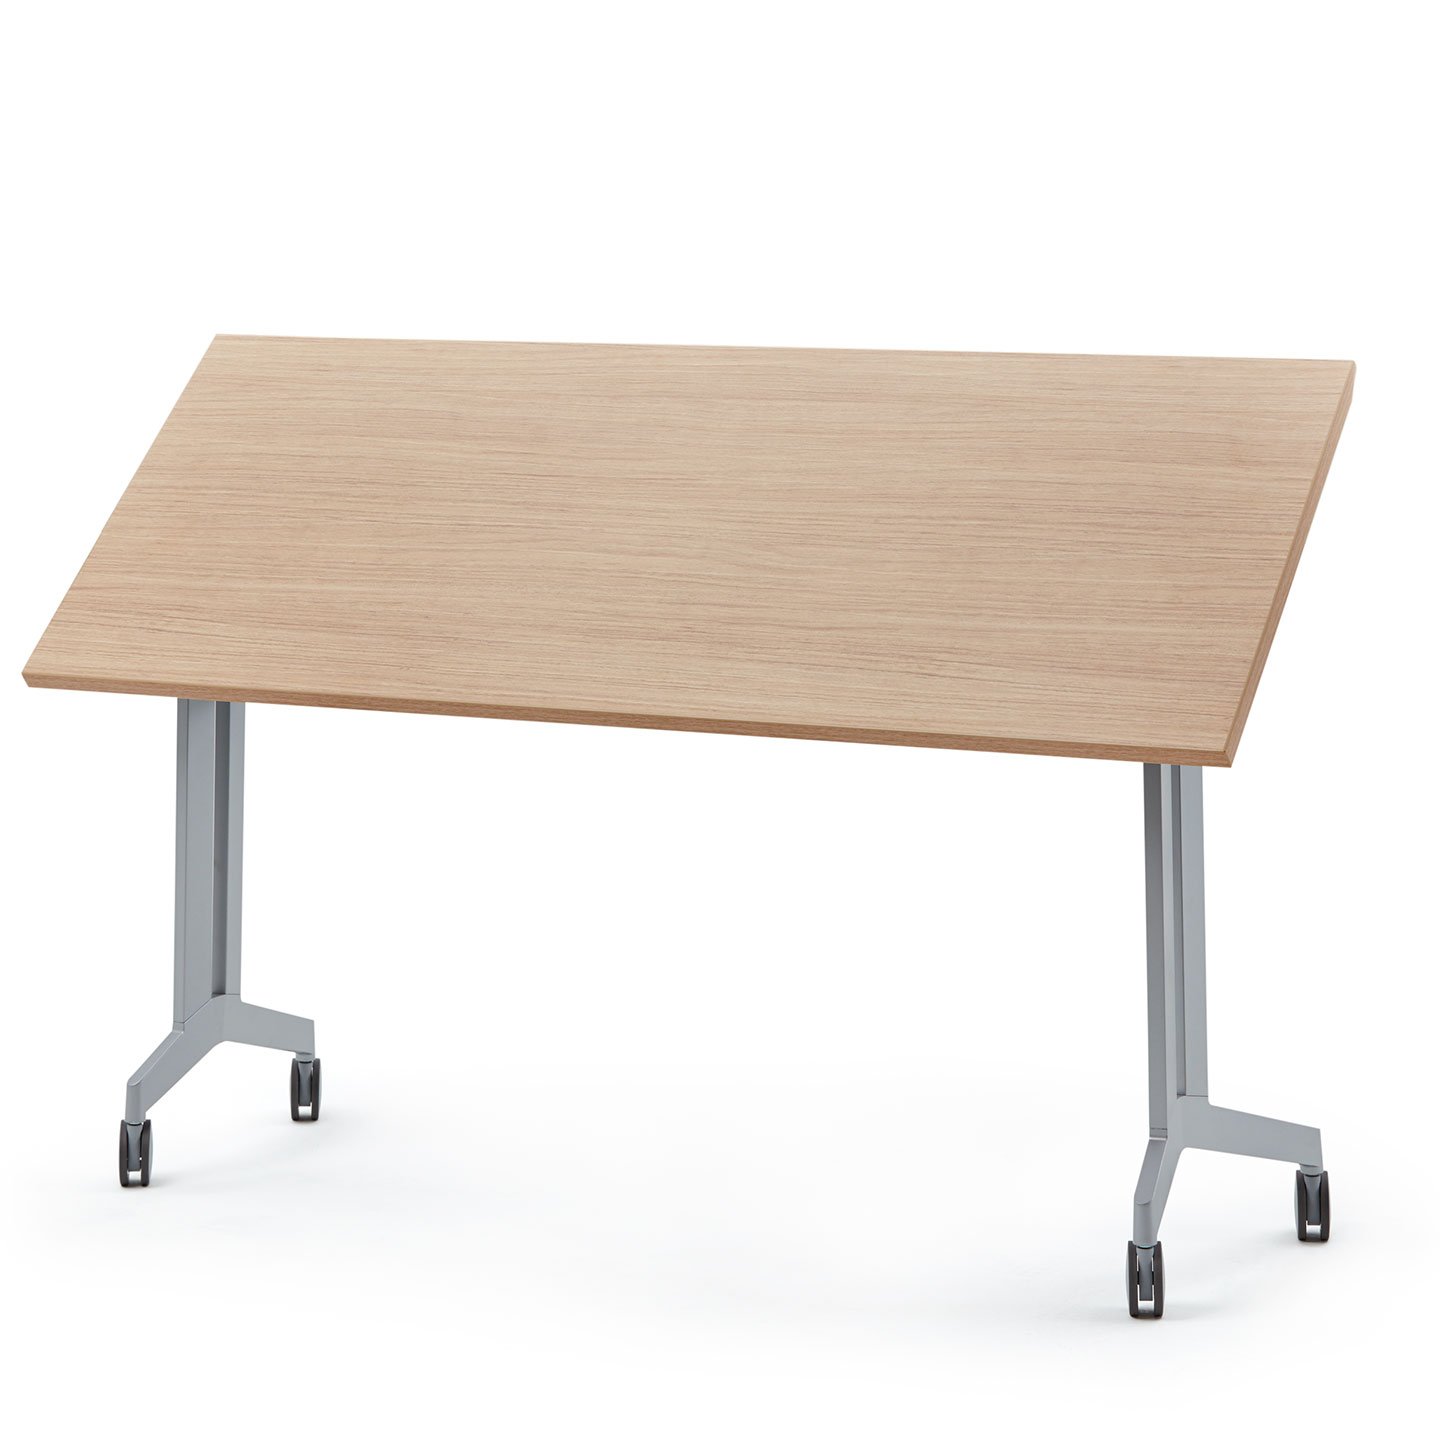 Haworth Planes Training Table with maple rectangular top and wheels on legs